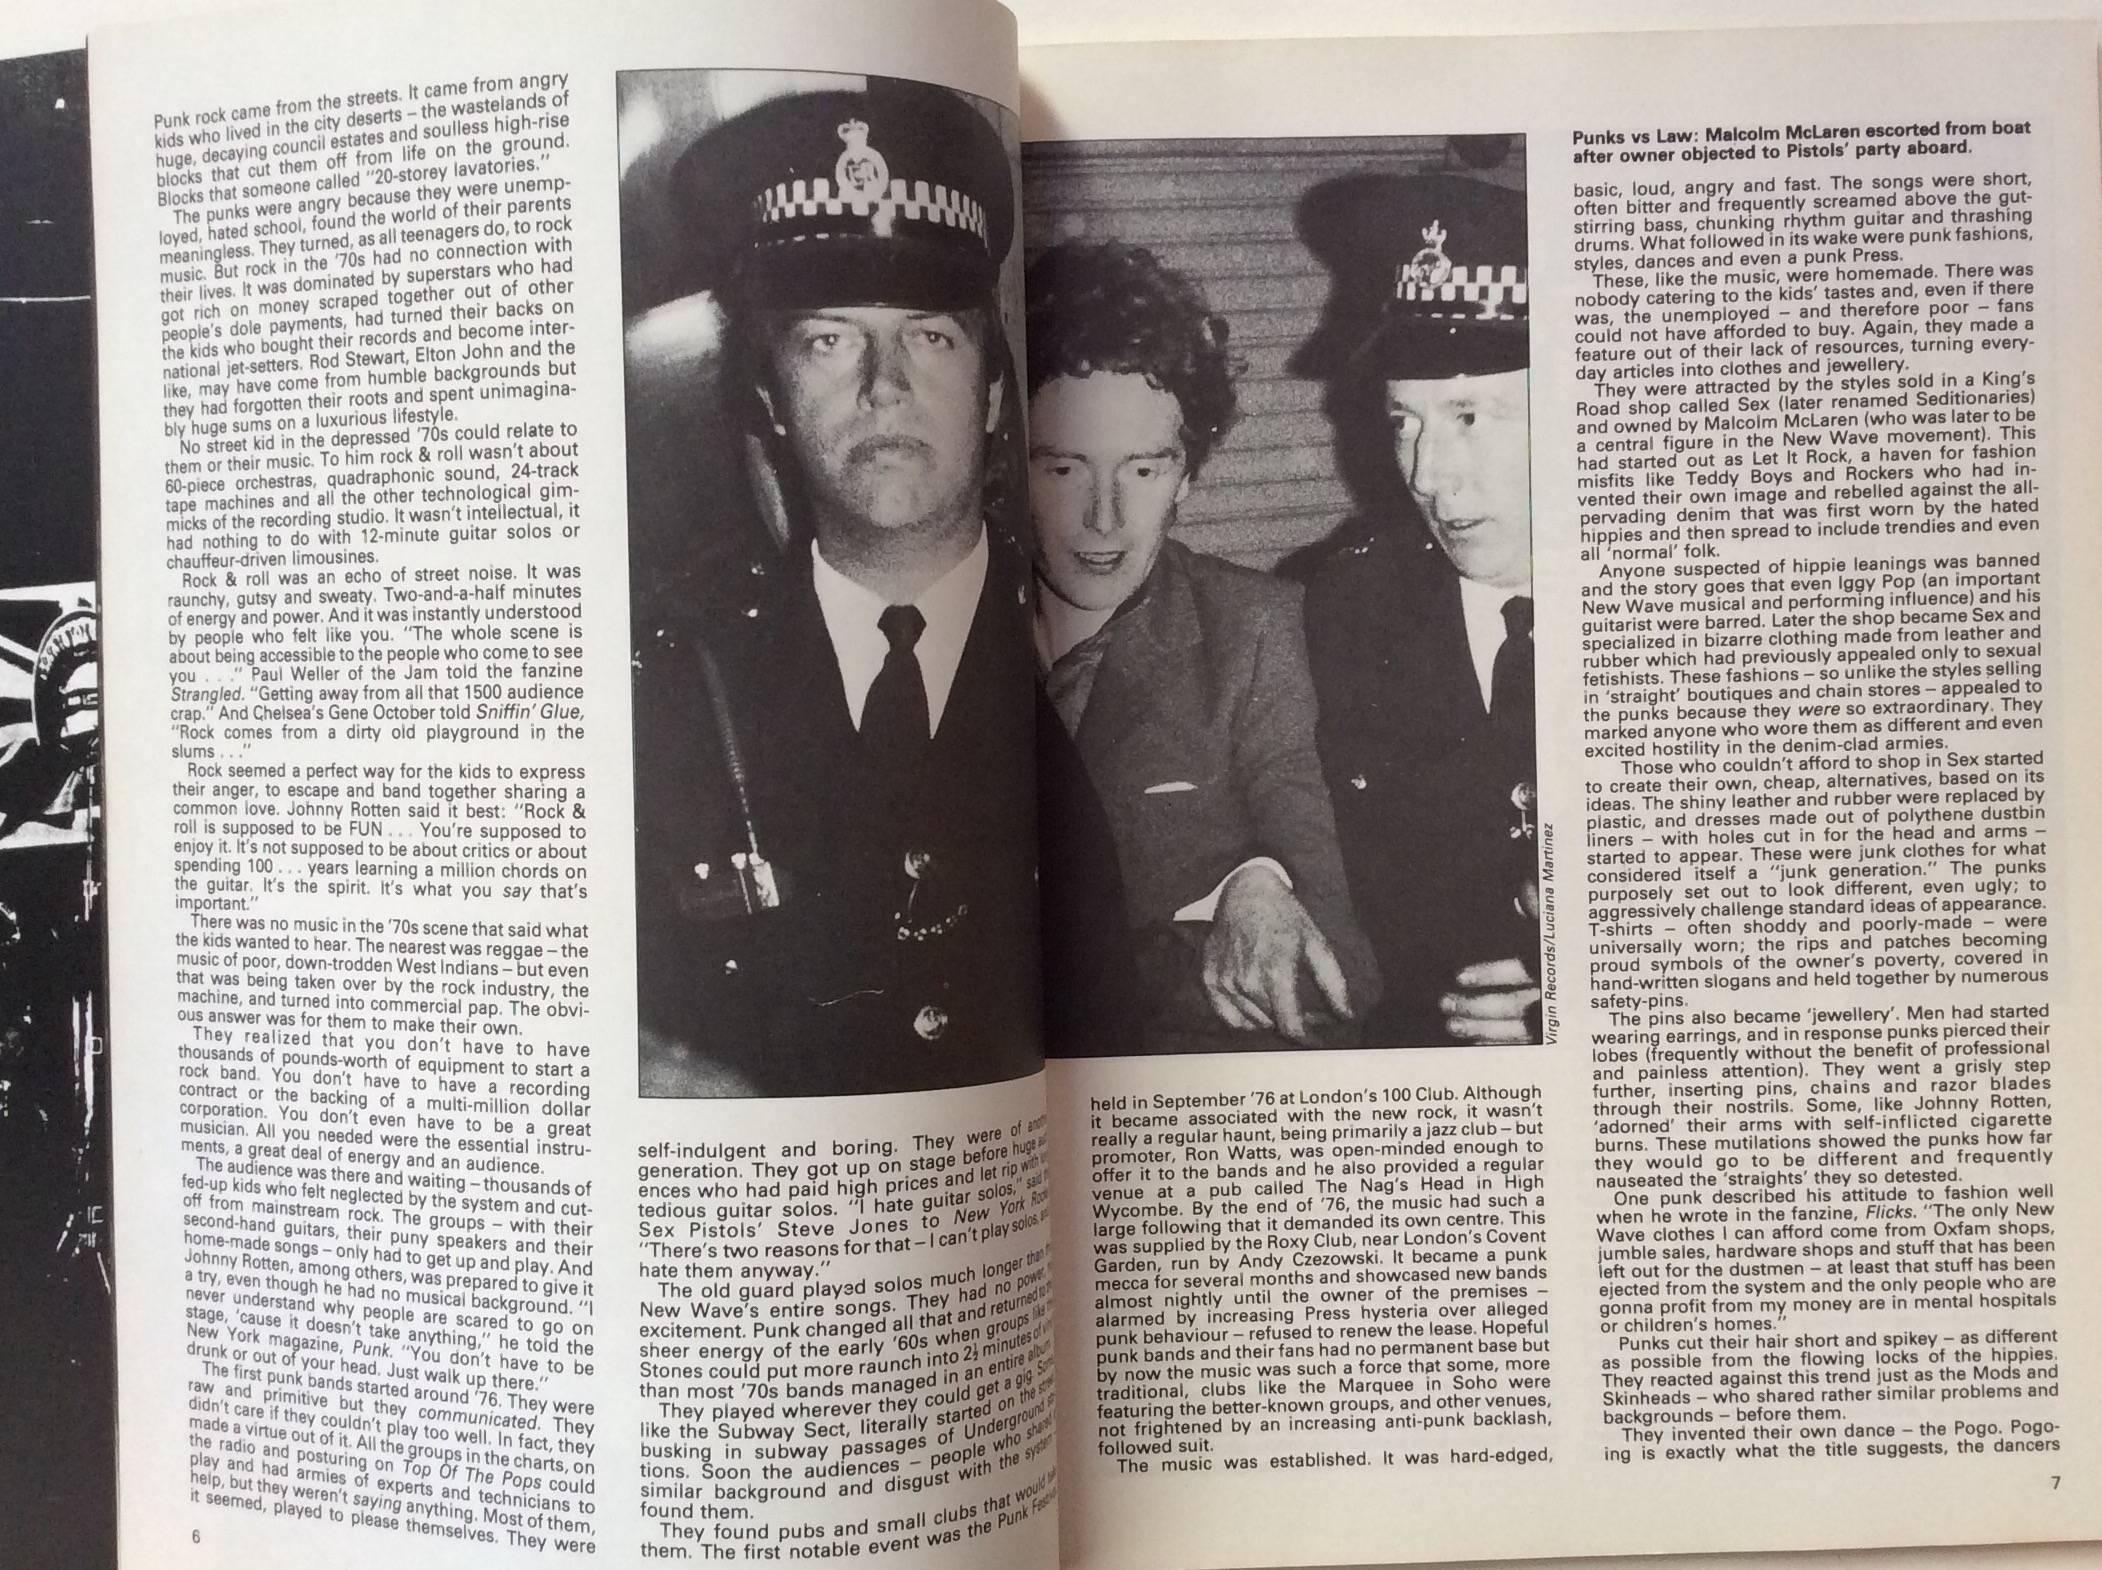 John Tobler 

Punk Rock

A Complete Guide to British and American New Wave

First edition, published by Pheobus Publishing, 1977

A complete rundown on Punk and New Wave artists from the Adverts to the Clash to the Damned. Punk Rock in all its